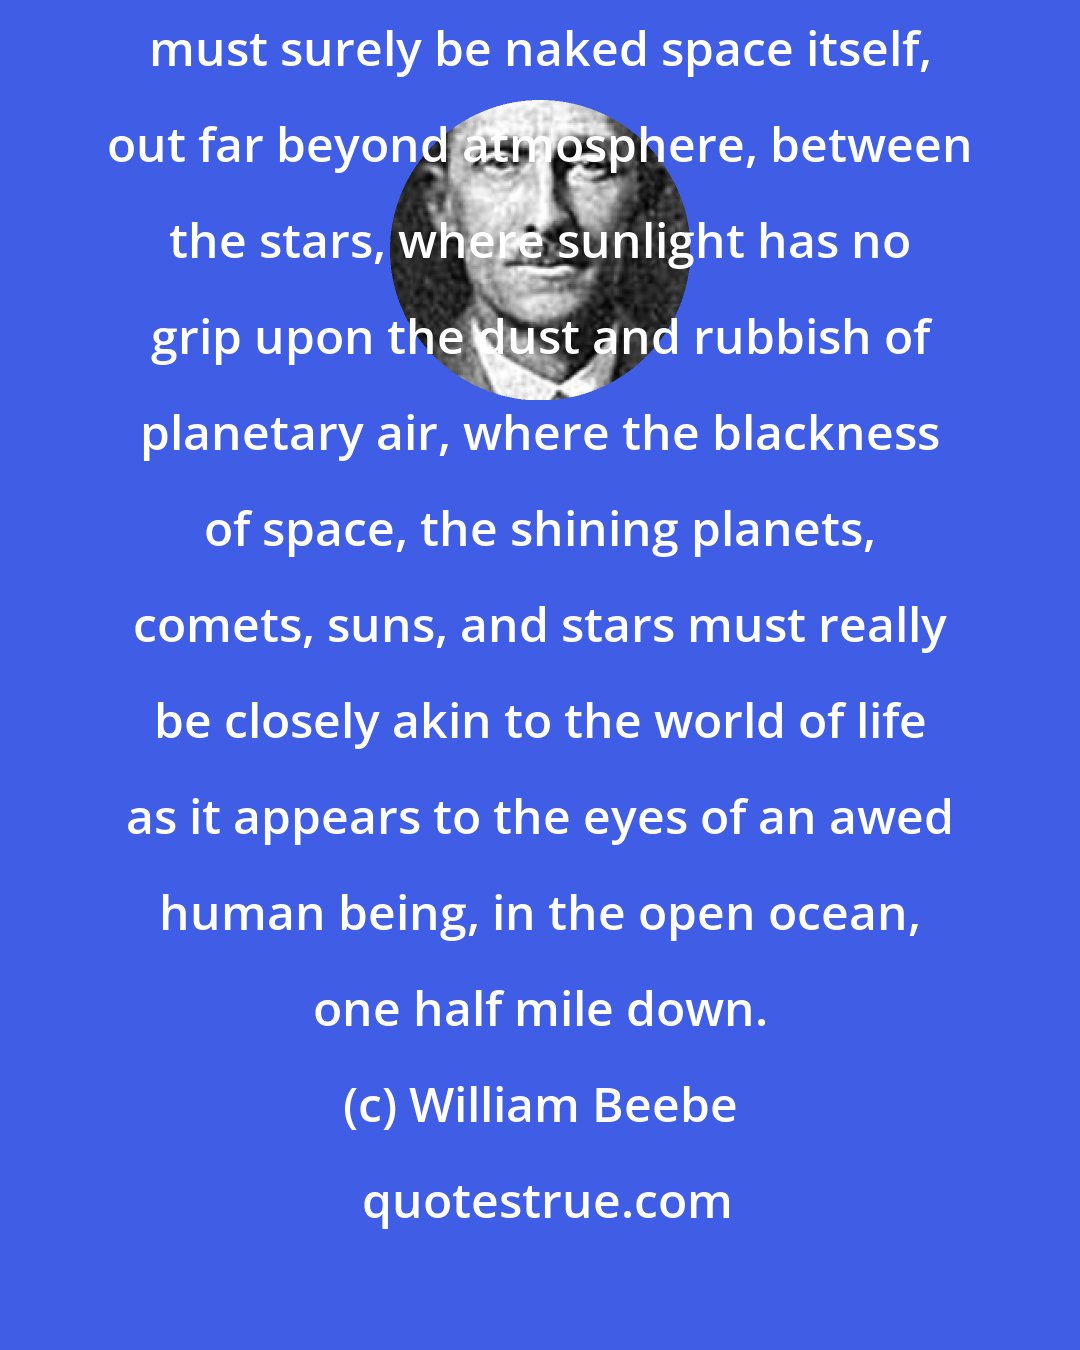 William Beebe: ... the only other place comparable to these marvelous nether regions, must surely be naked space itself, out far beyond atmosphere, between the stars, where sunlight has no grip upon the dust and rubbish of planetary air, where the blackness of space, the shining planets, comets, suns, and stars must really be closely akin to the world of life as it appears to the eyes of an awed human being, in the open ocean, one half mile down.